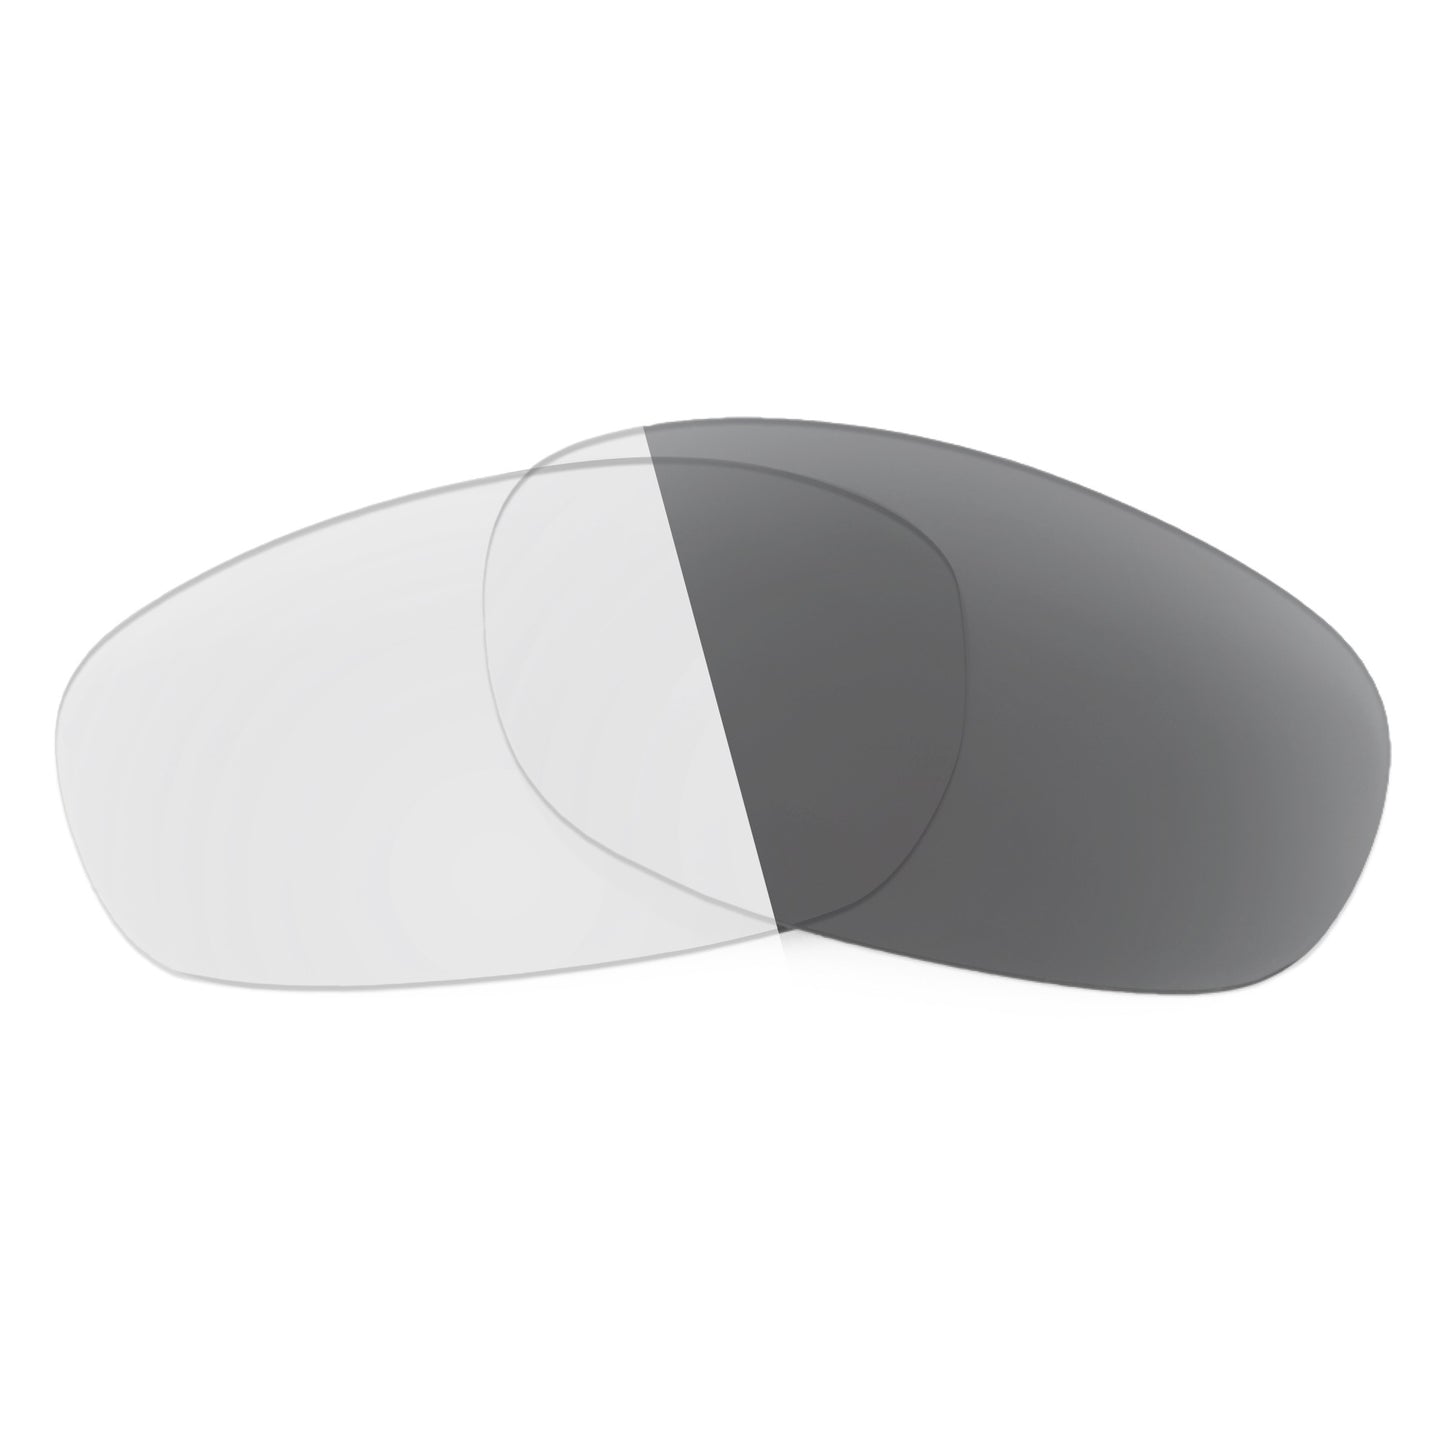 Revant replacement lenses for Ray-Ban RB4033 60mm Non-Polarized Adapt Gray Photochromic